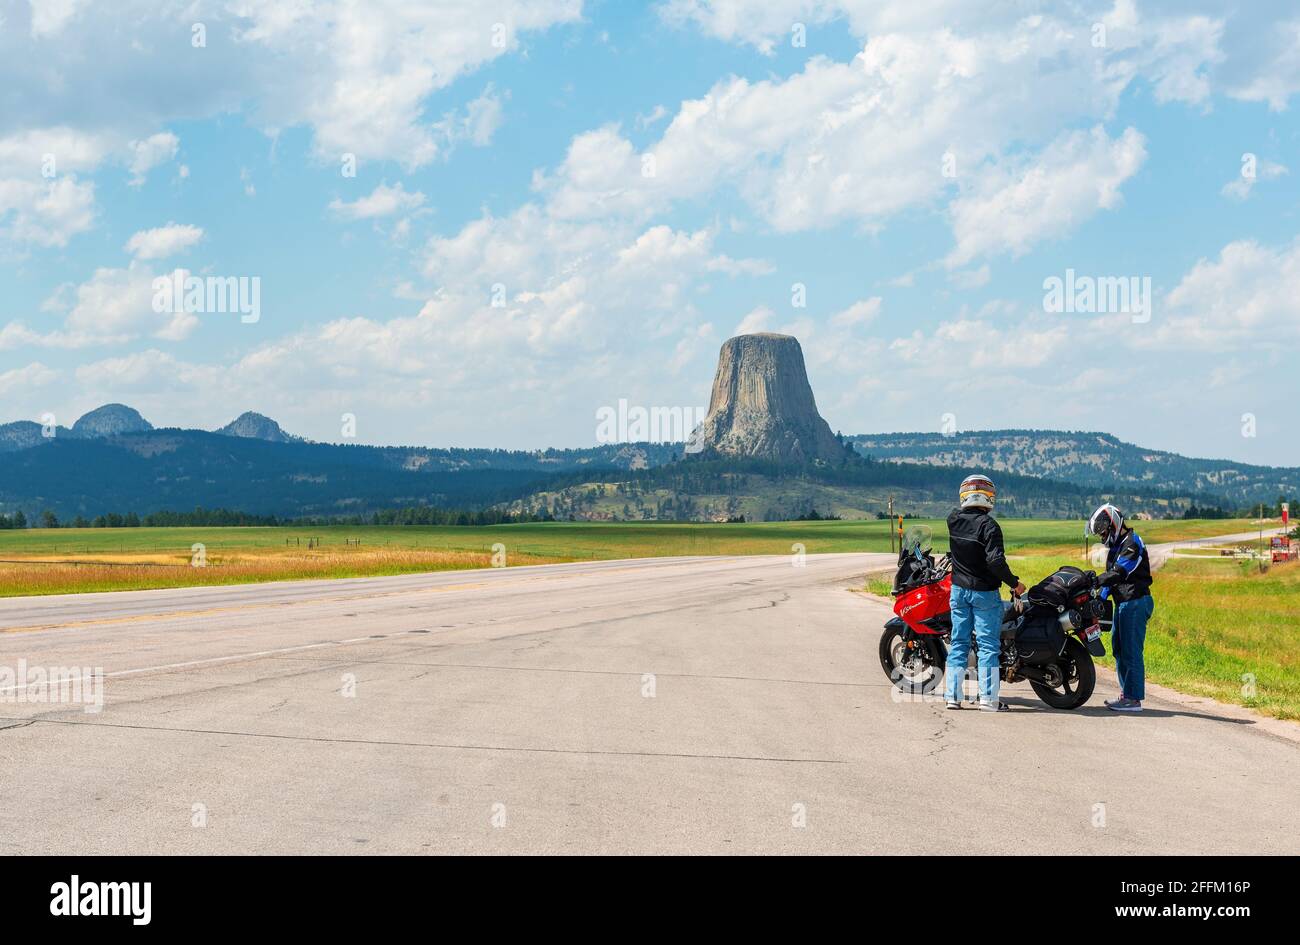 Bikers with motorcycle along highway with Devils Tower national monument, Wyoming, United States of America, USA. Stock Photo